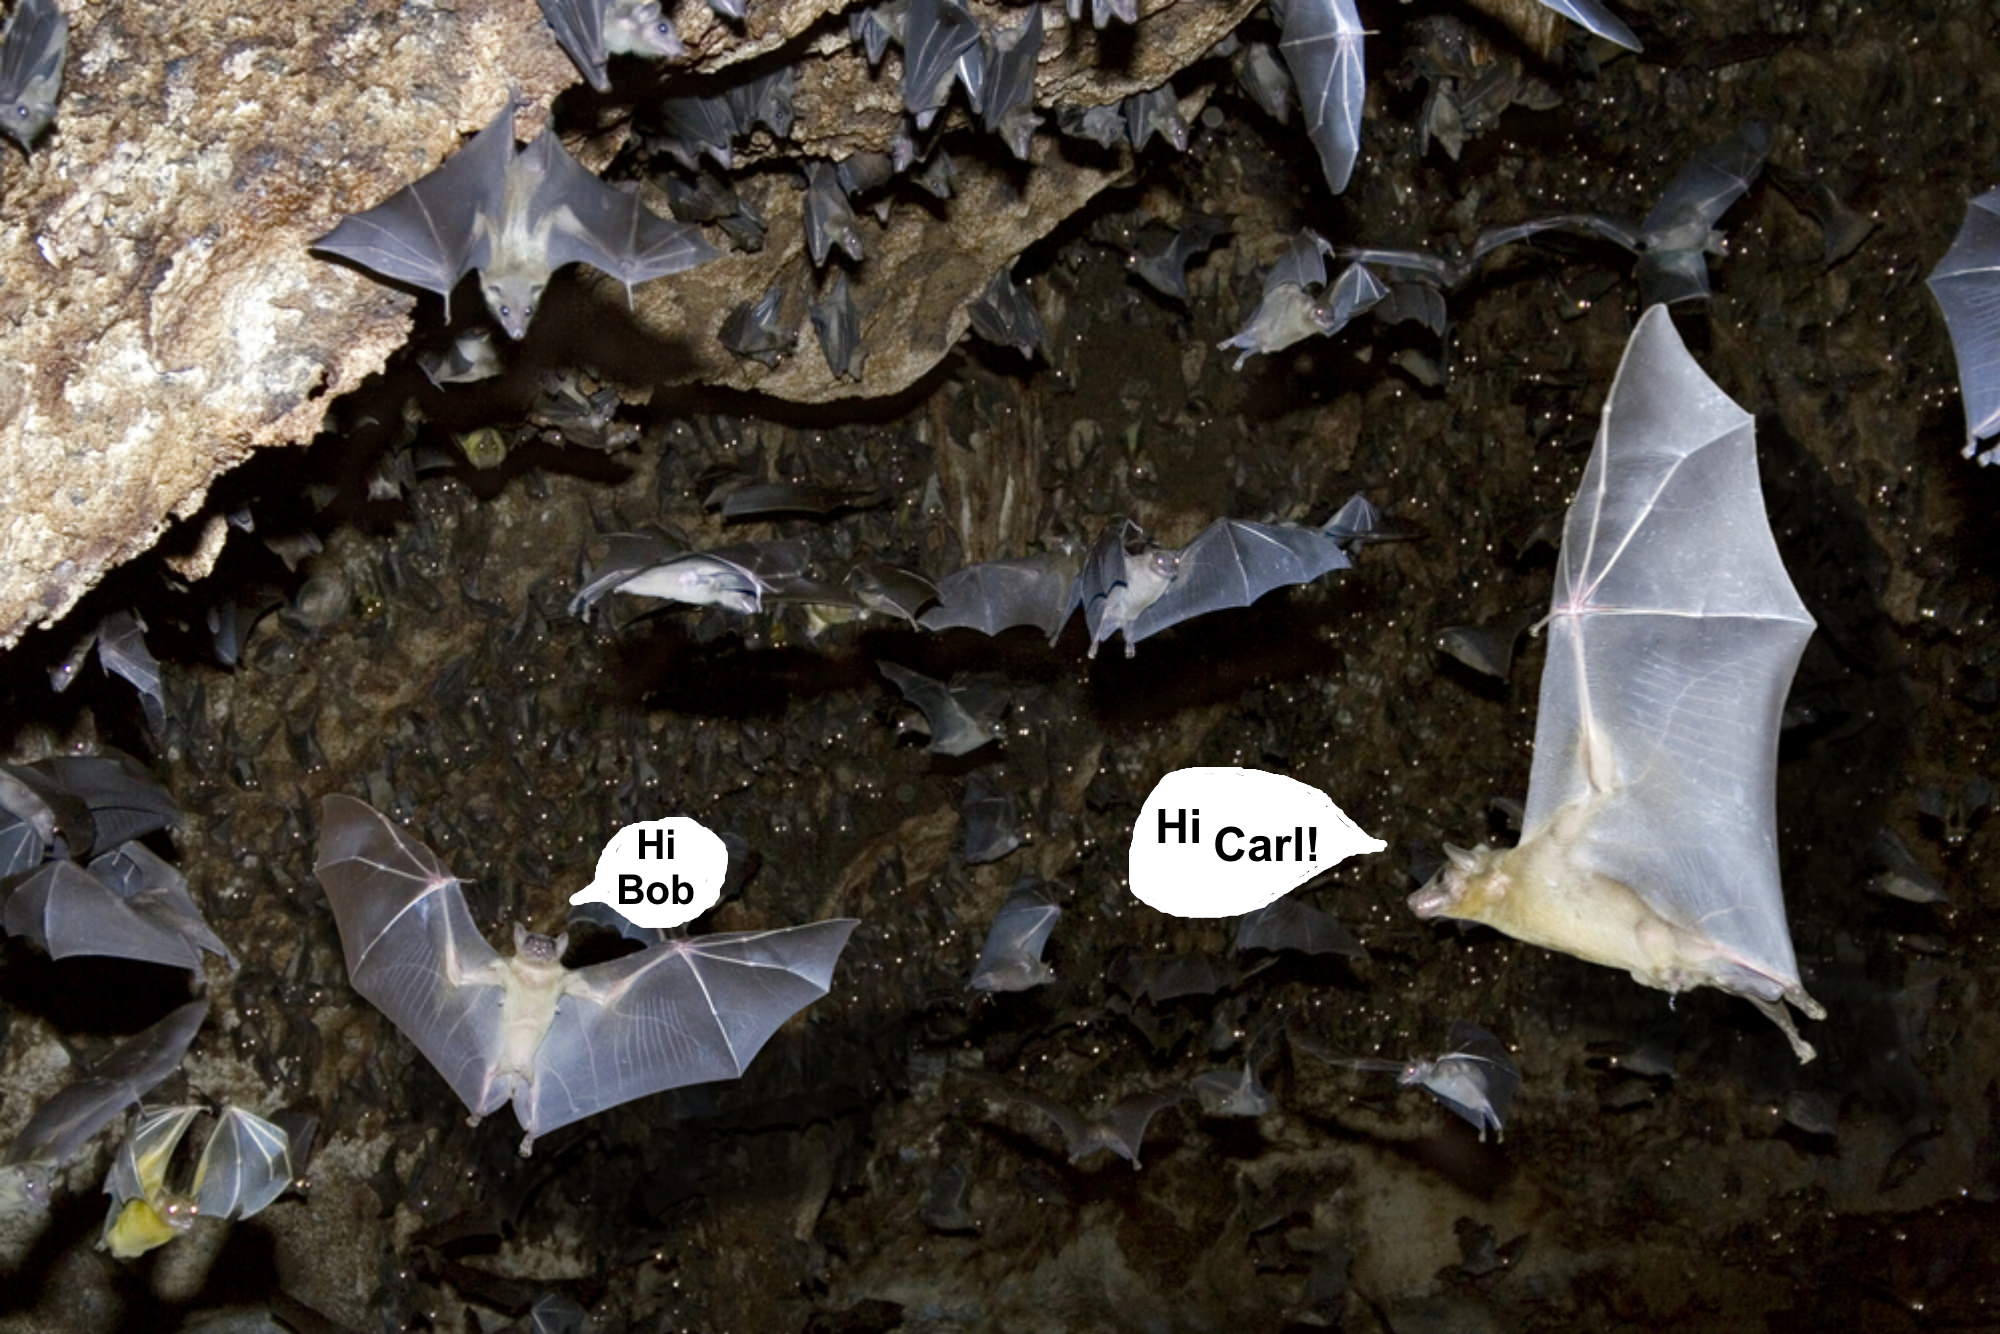 Not only that, the researchers discovered the bats make slightly different versions of the calls when speaking to different individuals within the group. Essentially, each bat in the colony has their own name. The researchers point out that besides humans, only dolphins and a few of other species are known to address specific individuals rather than just making broad communication sounds.